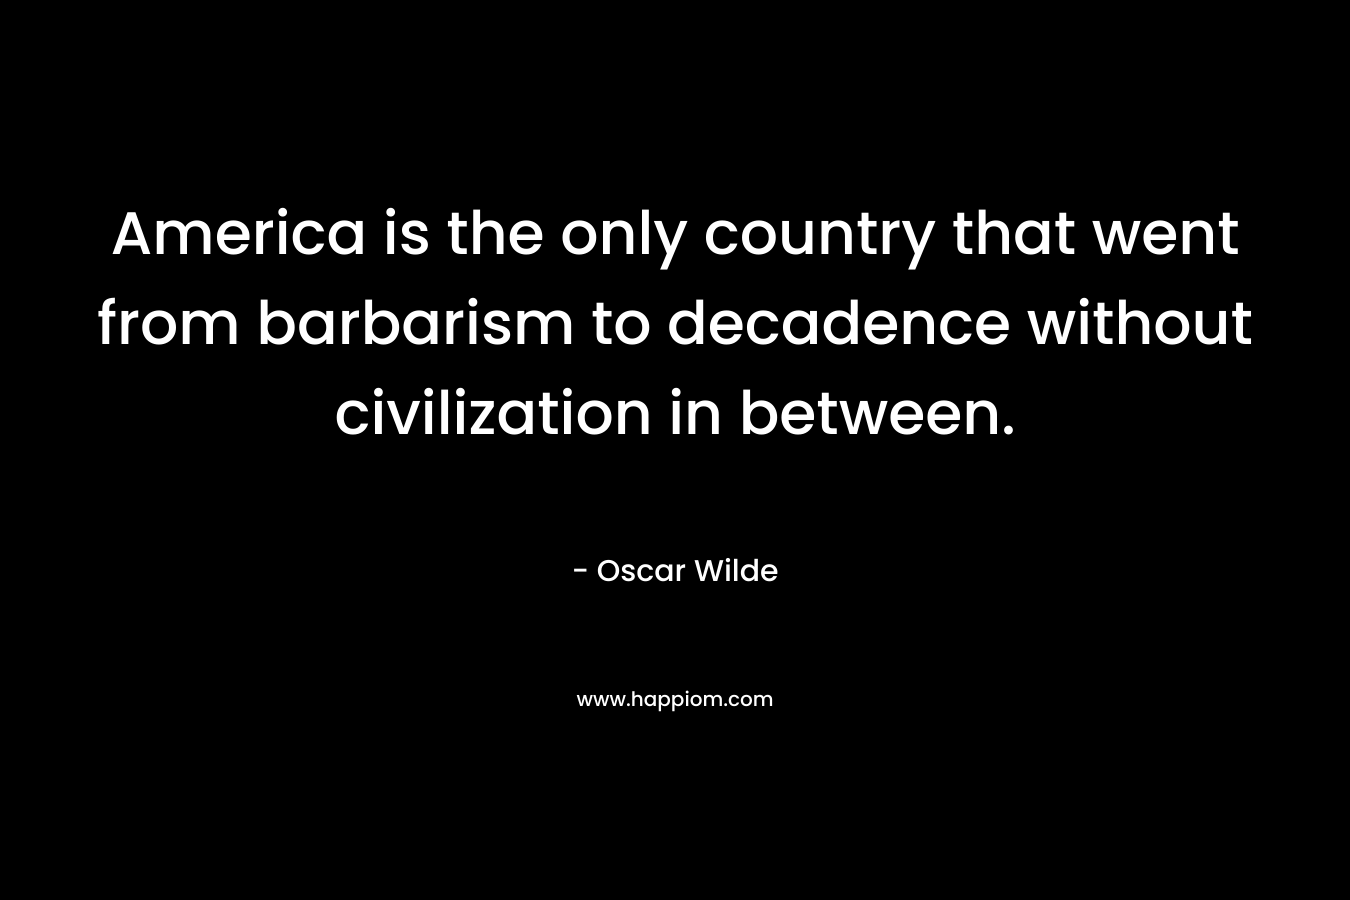 America is the only country that went from barbarism to decadence without civilization in between. – Oscar Wilde